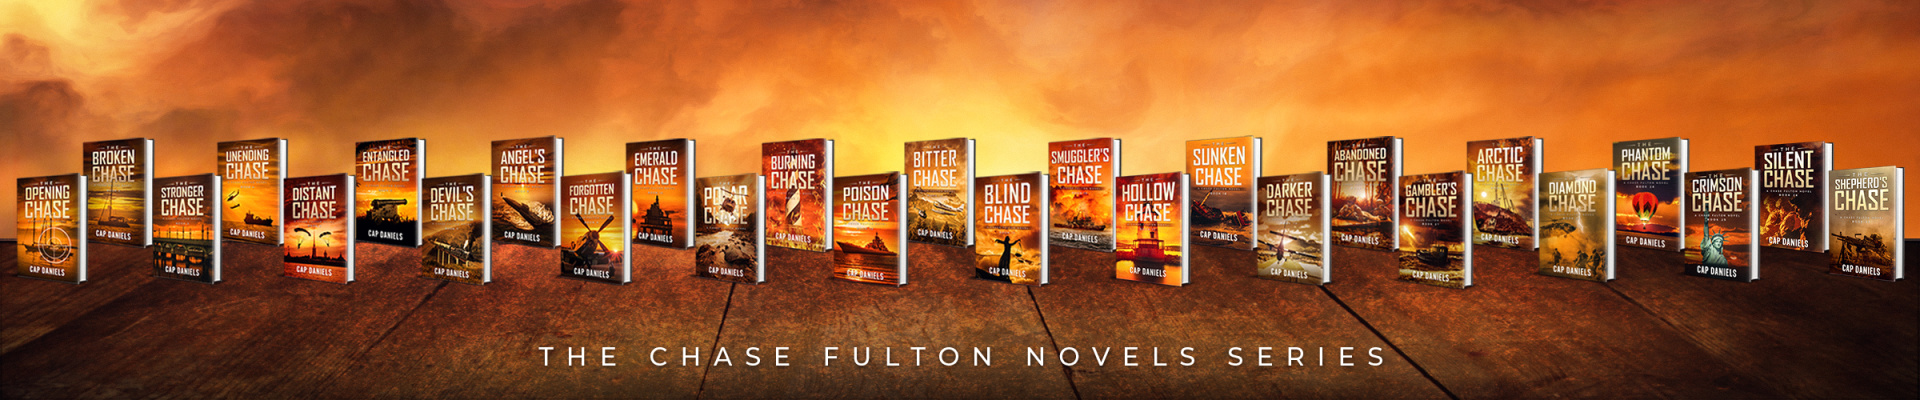 Chase Fulton Novels Series book list graphic by author Cap Daniels.